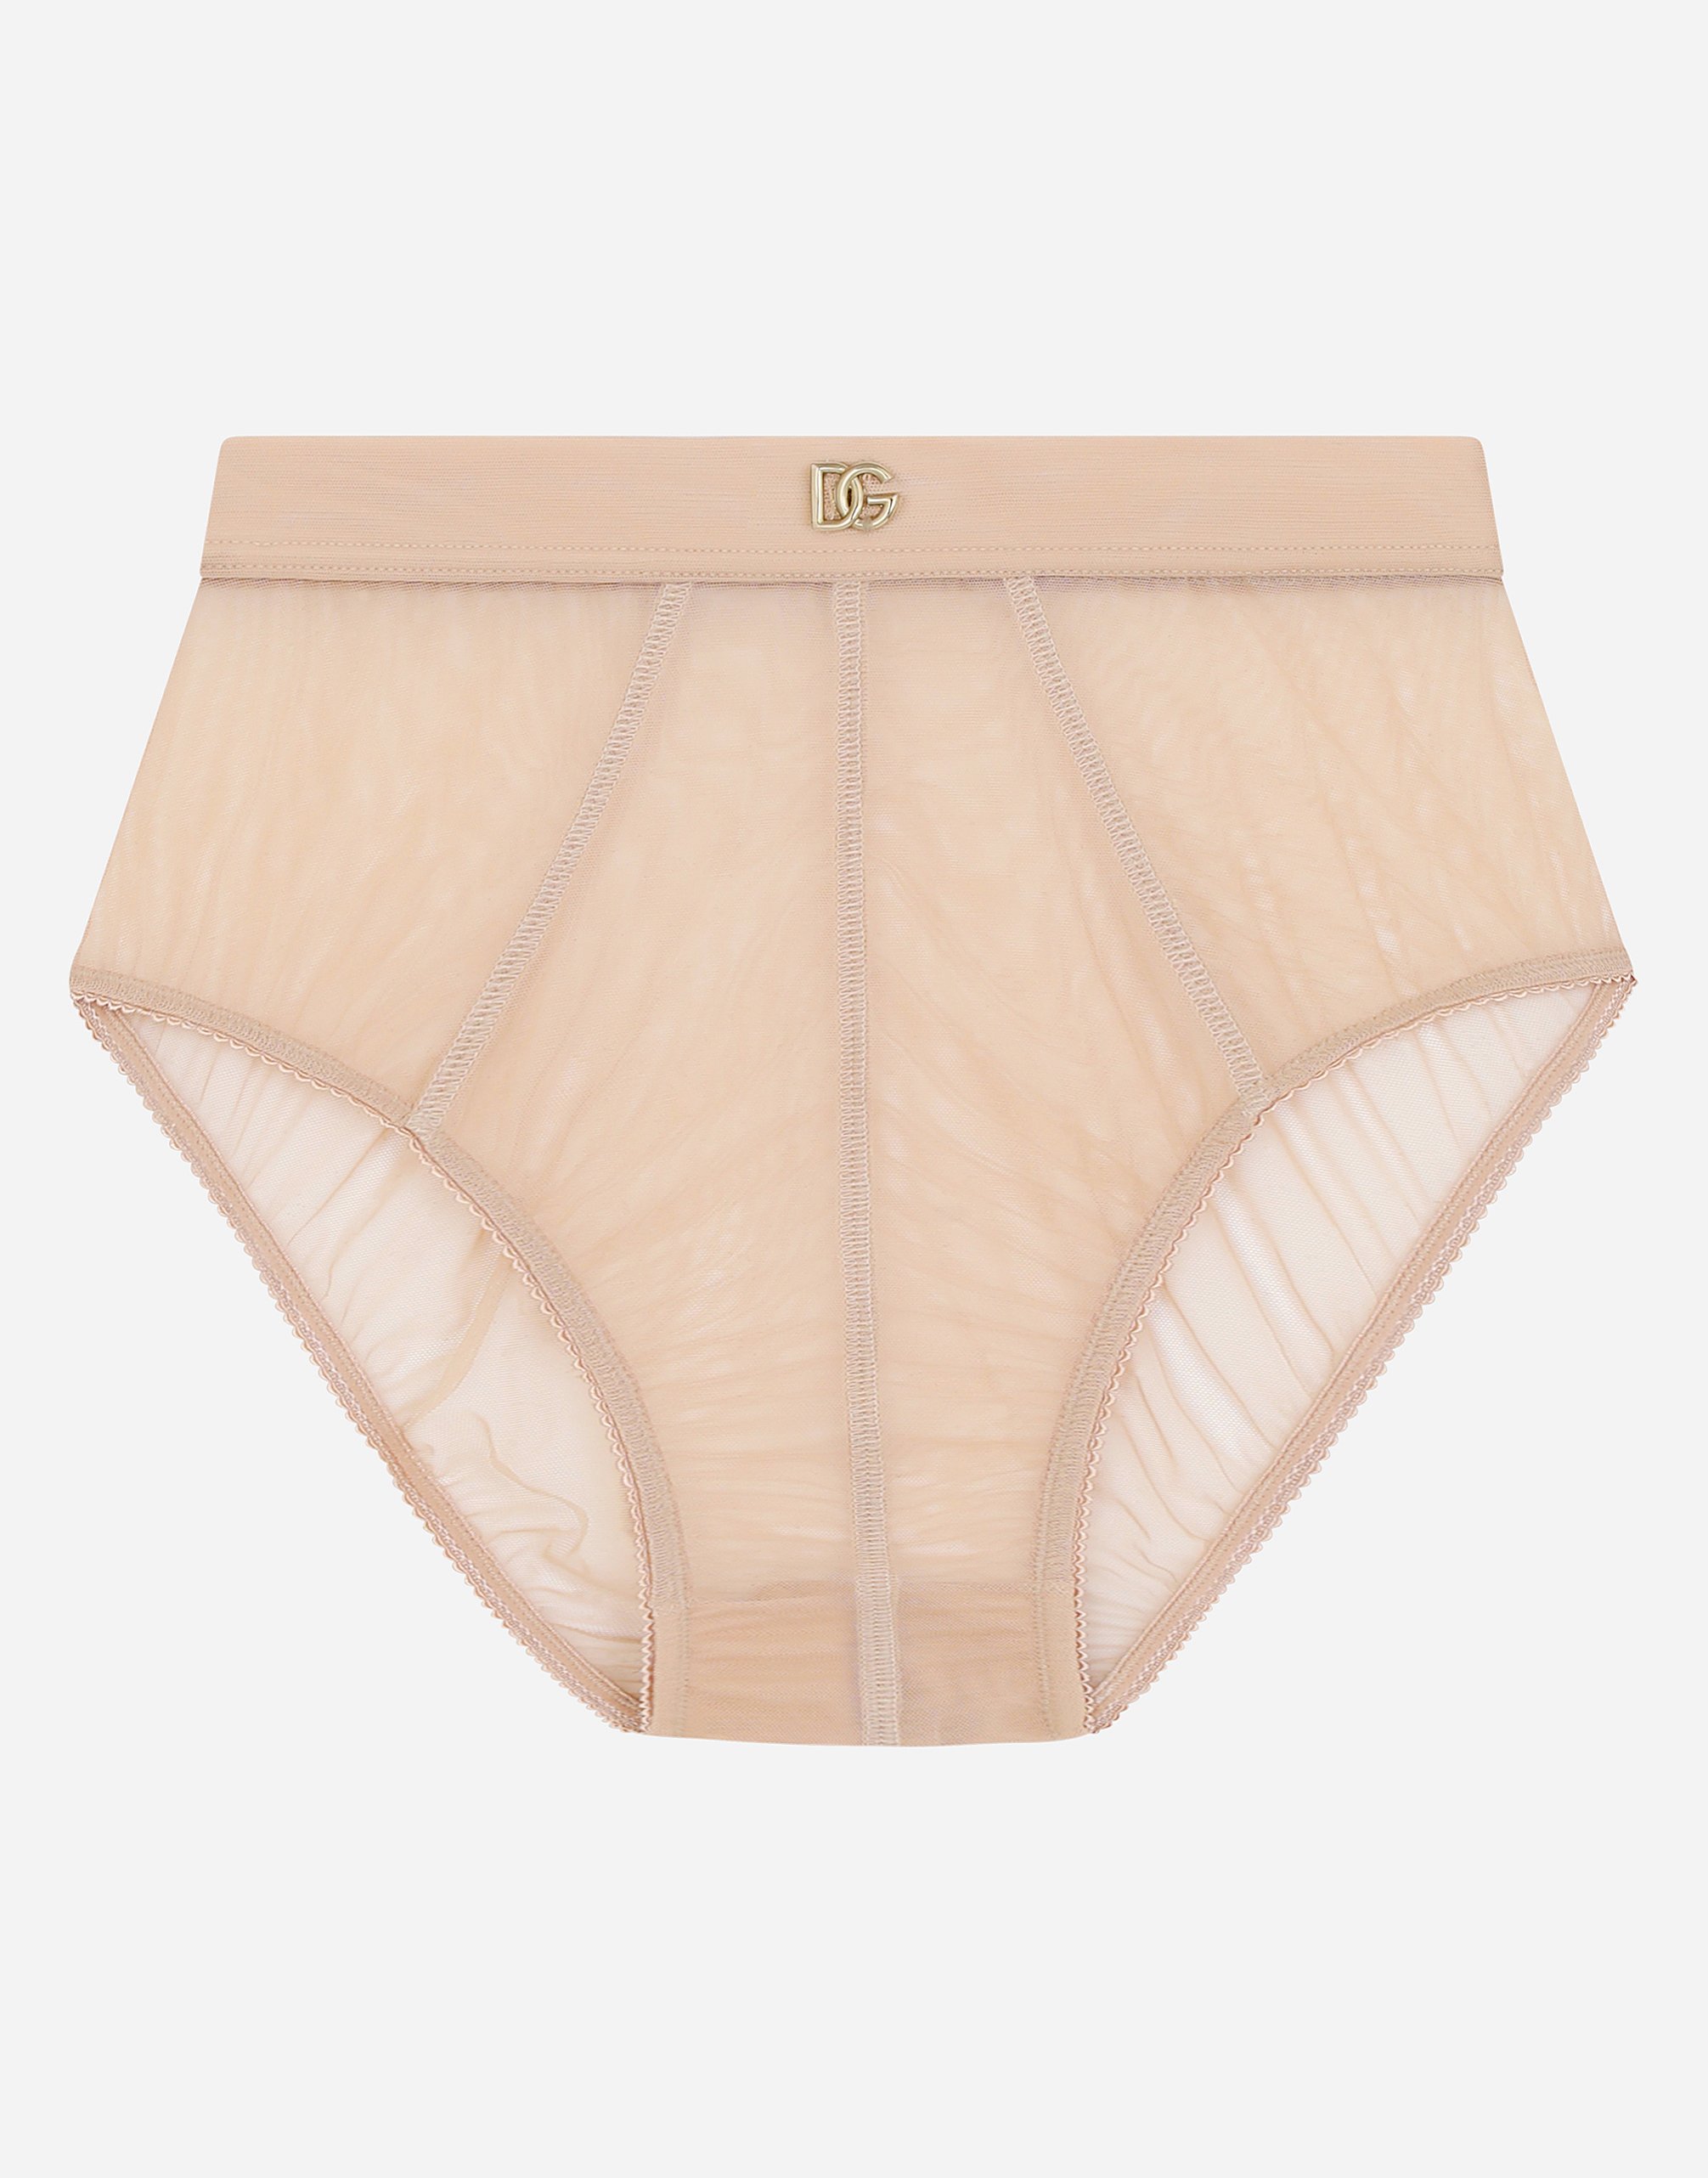 High-waisted tulle briefs with DG logo in Pale Pink